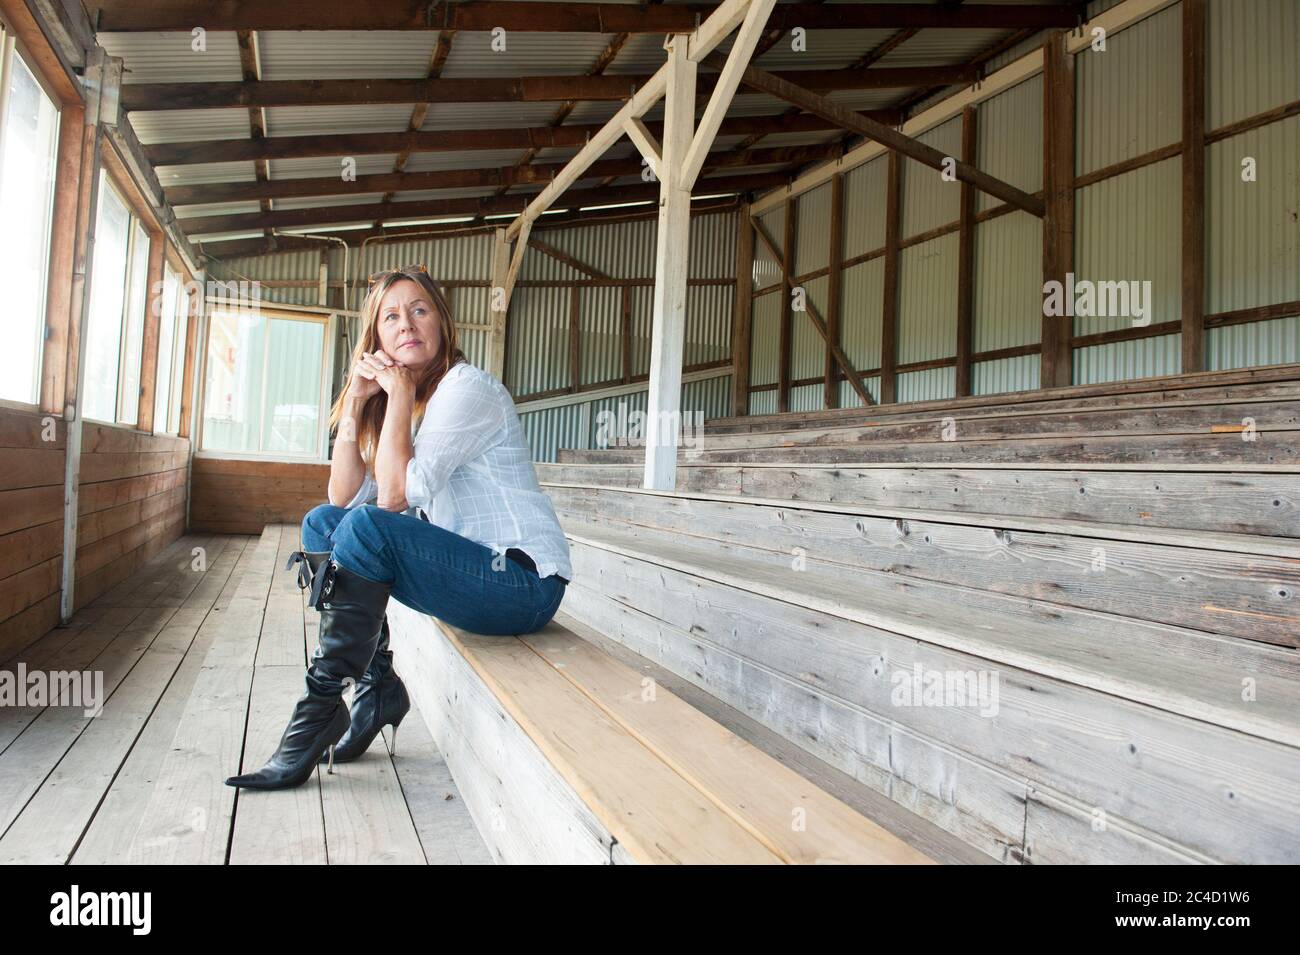 Portrait attractive mature woman sitting thoughtful, sad and concerned on bench, wearing jeans, blouse and stiletto boots, copy space. Stock Photo